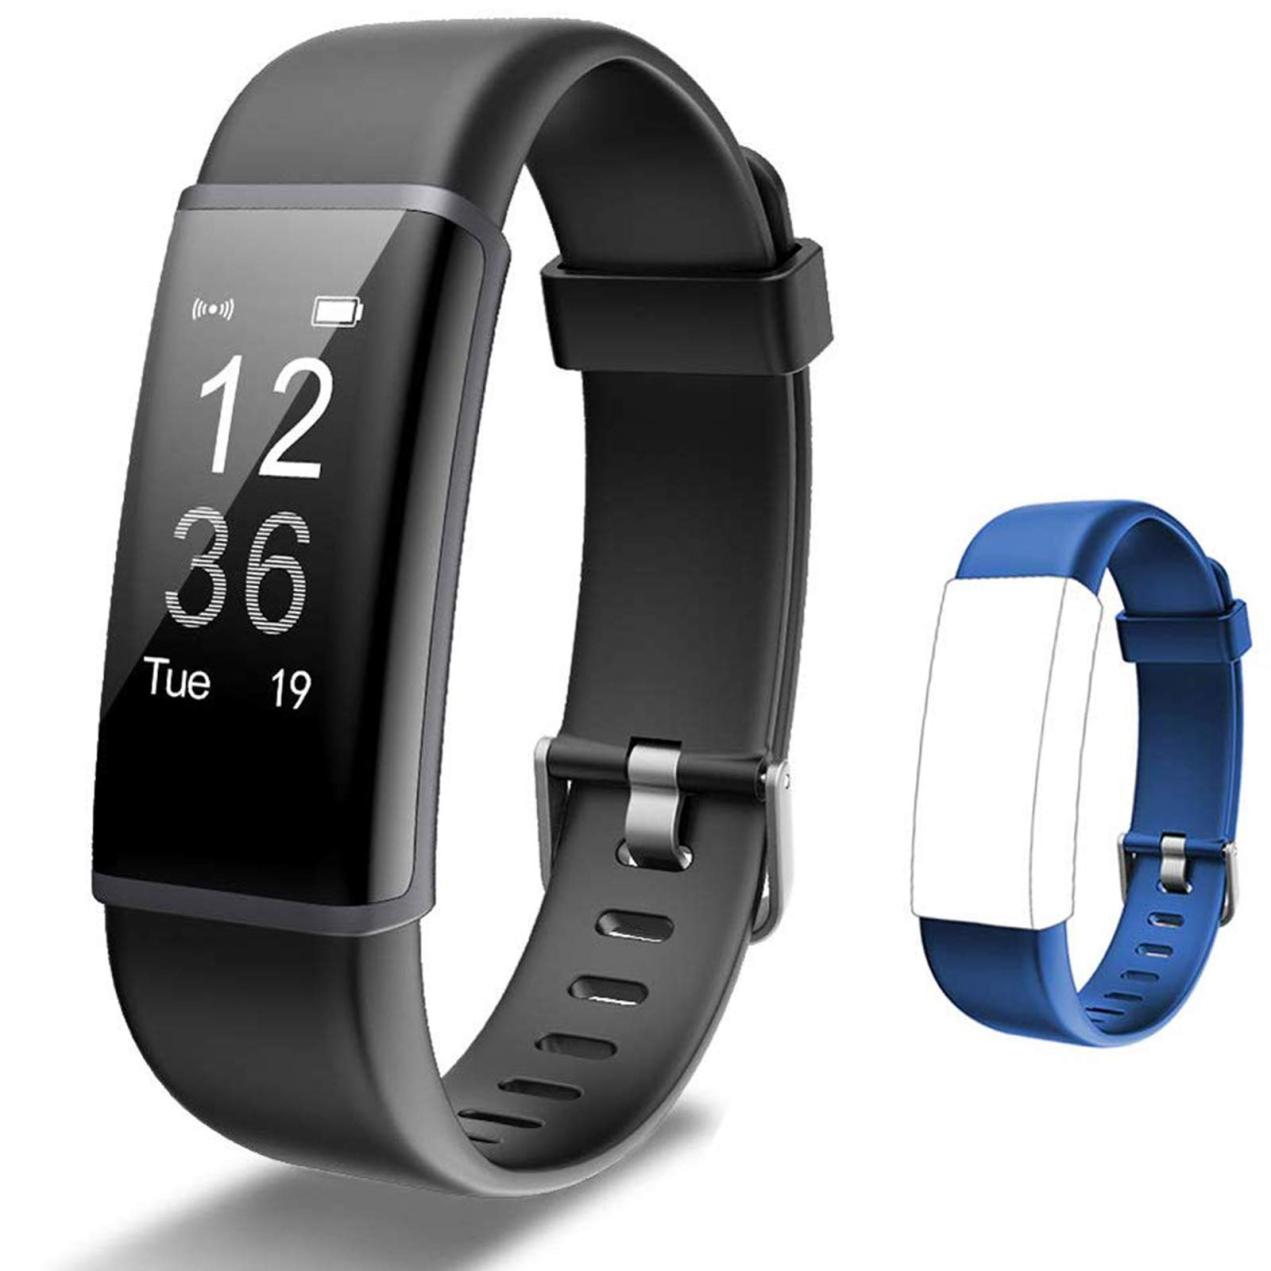 What Are The Benefits Of Using Fitness Apps And Activity Trackers?